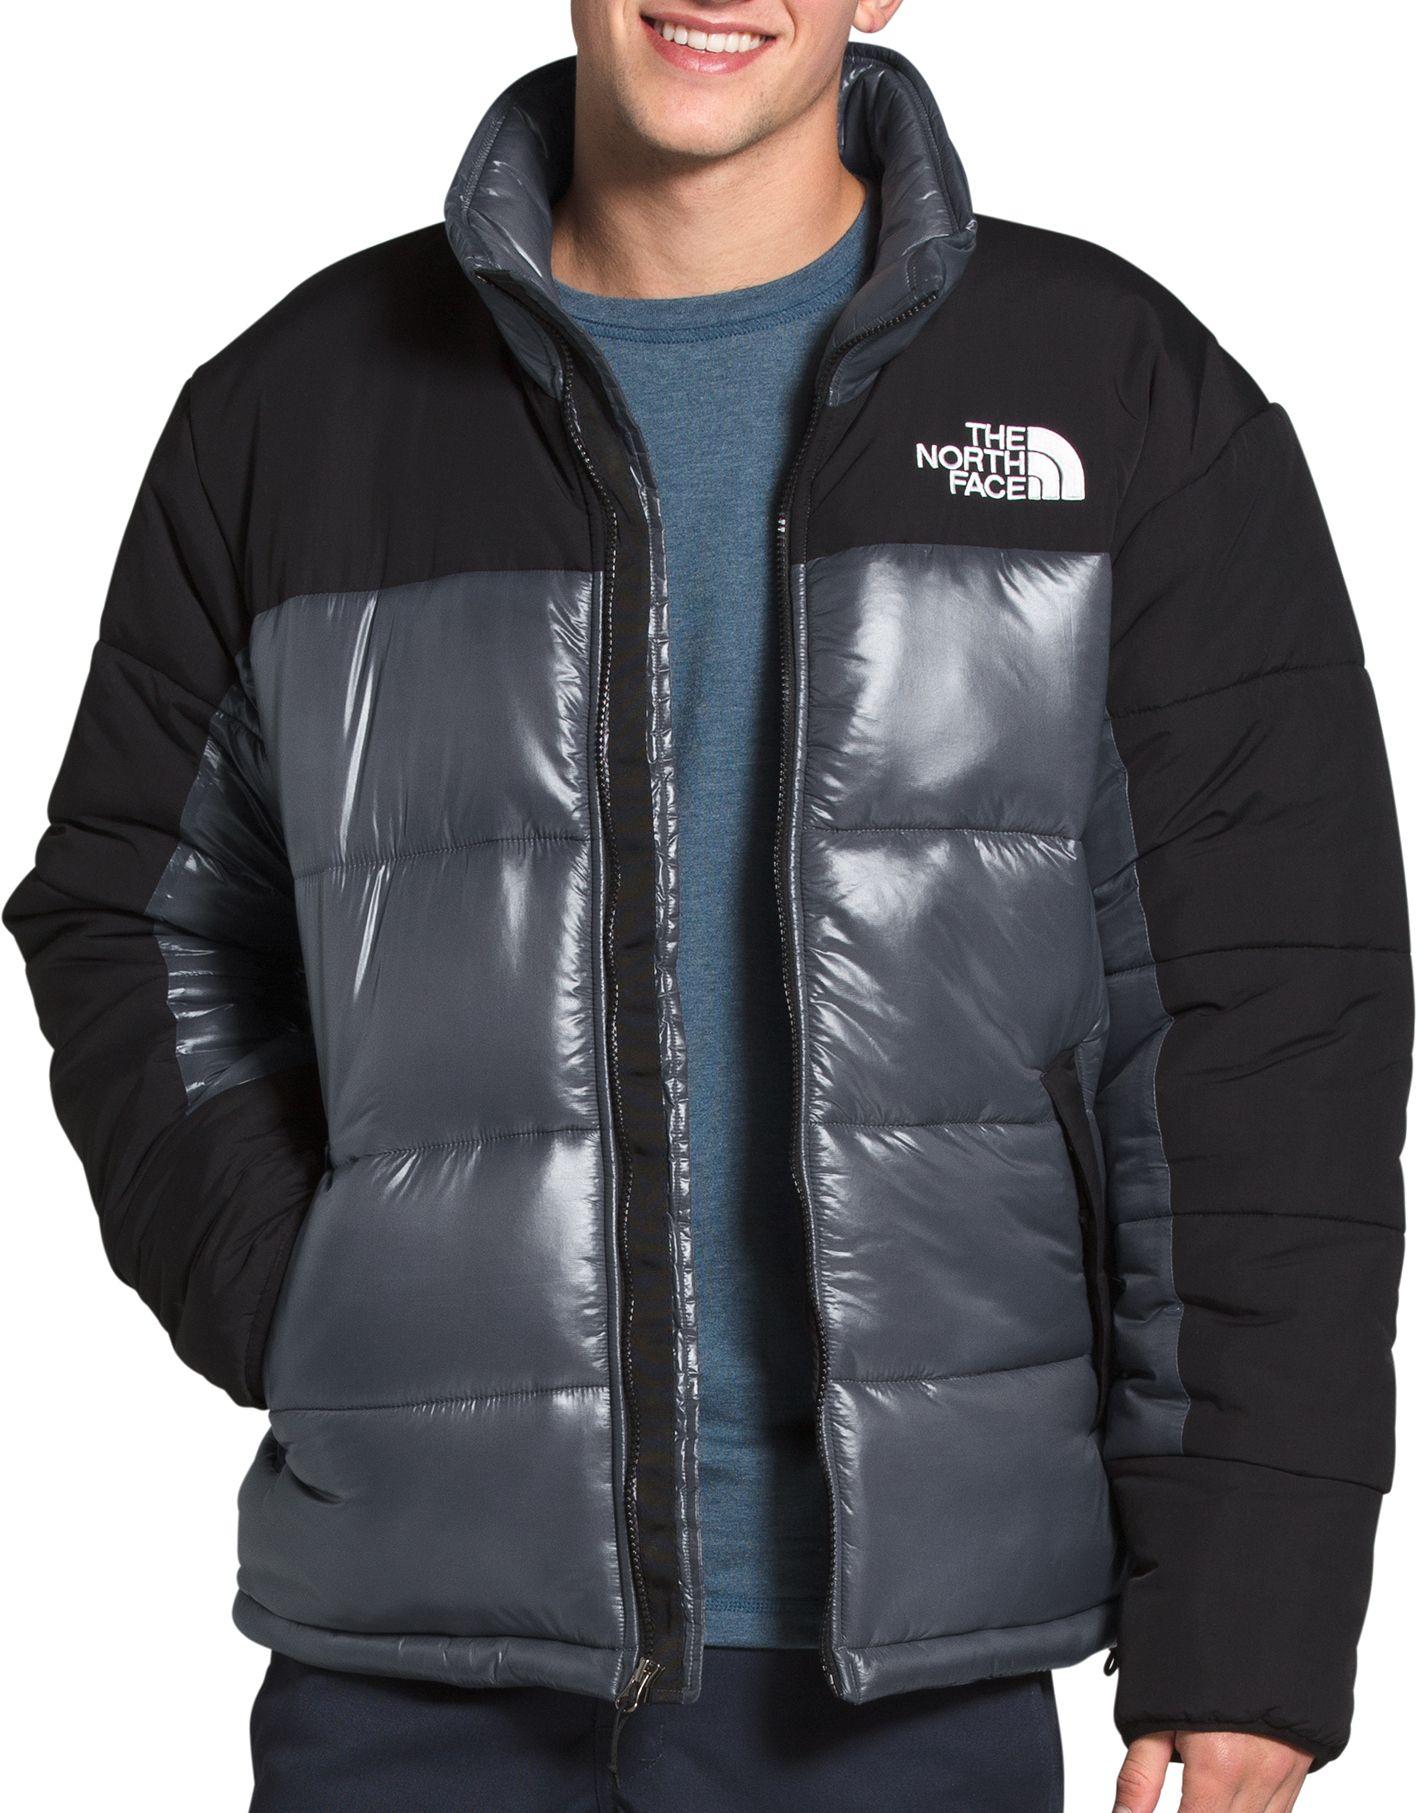 The North Face Synthetic Himalayan Insulated Jacket in Gray for Men - Lyst